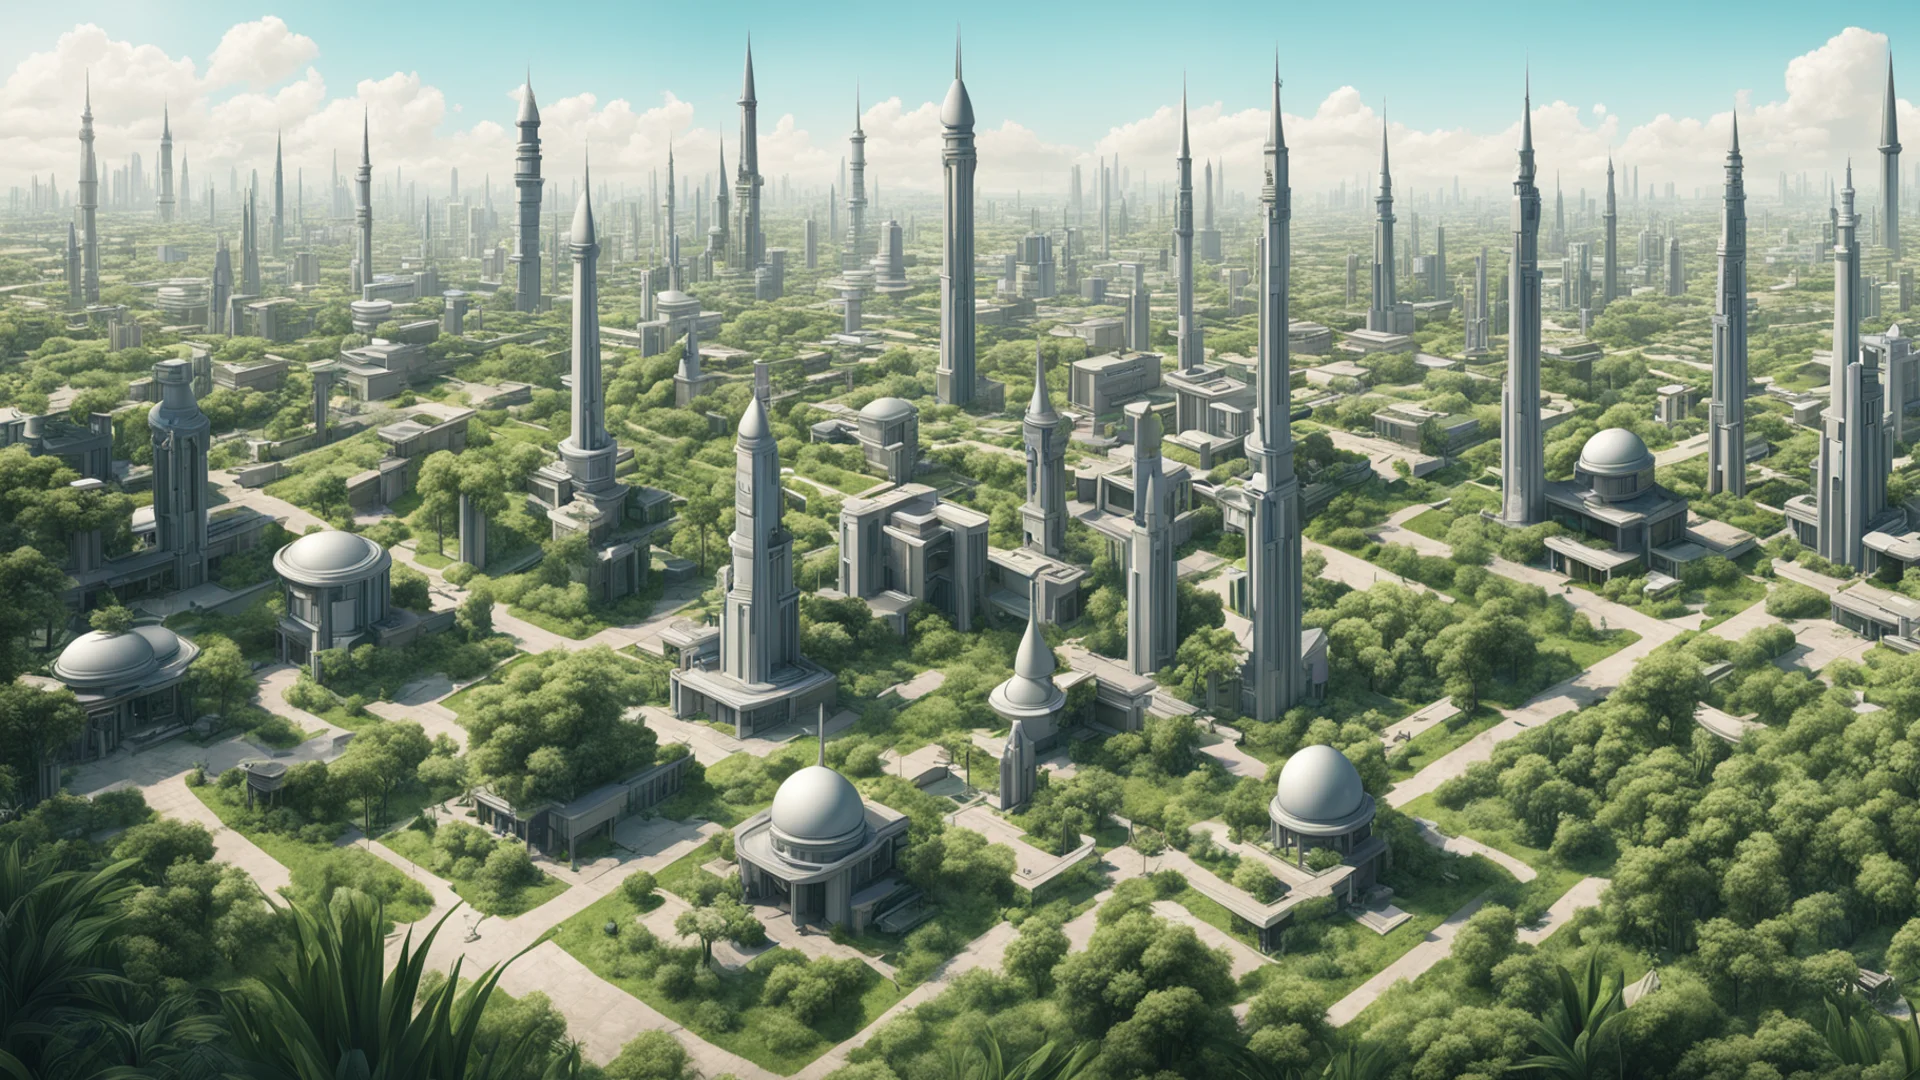 aihighly detailed futuristic suburban area with a minaret in between and vegetation in forms of buildings   wide